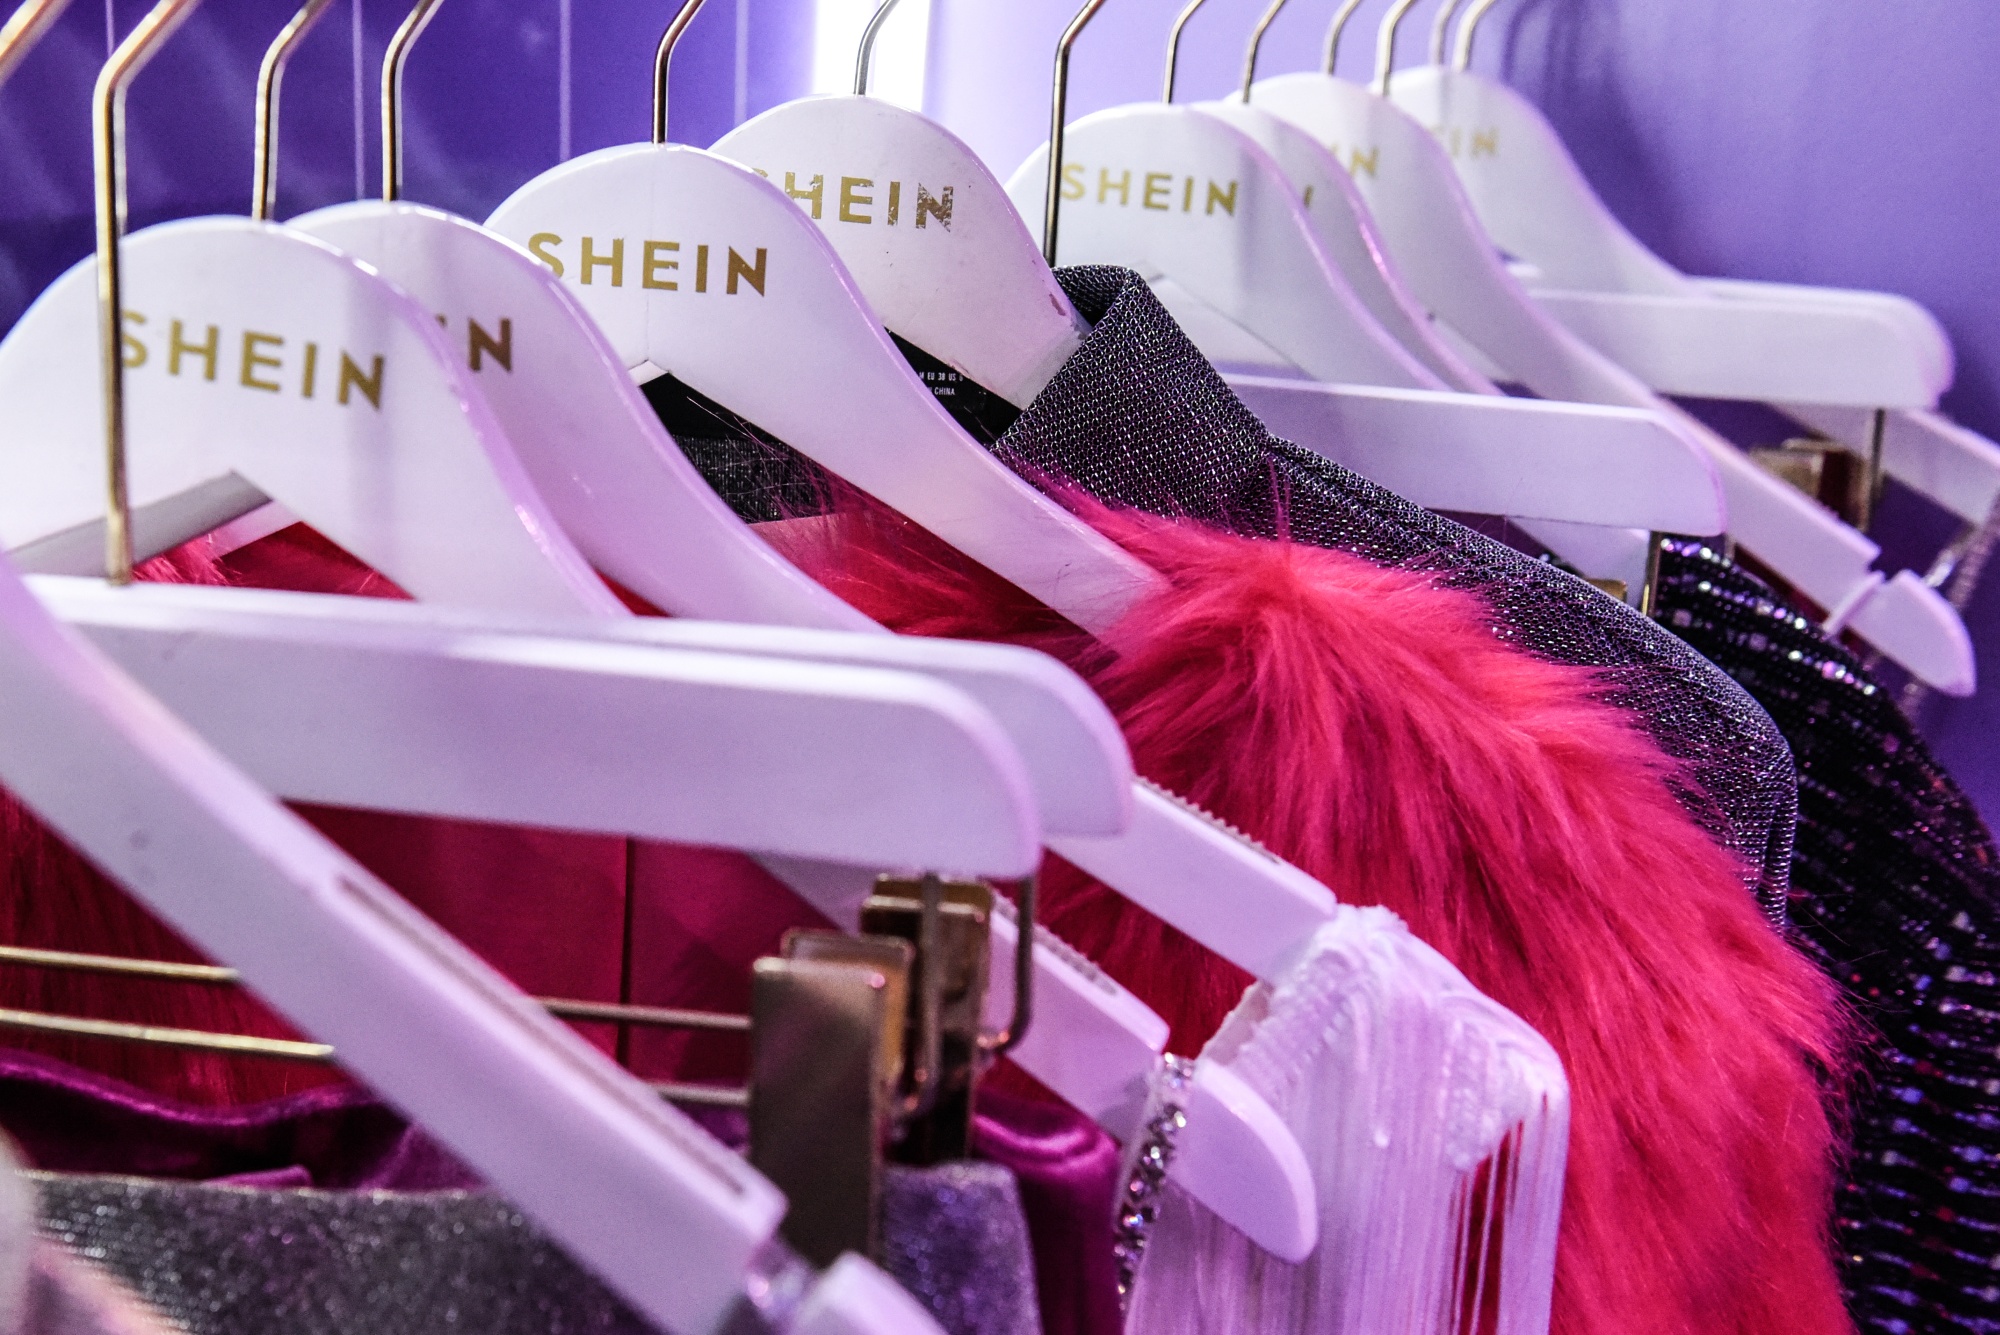 Is Shein About To Hit Stock Market? Report Says Company Filed For